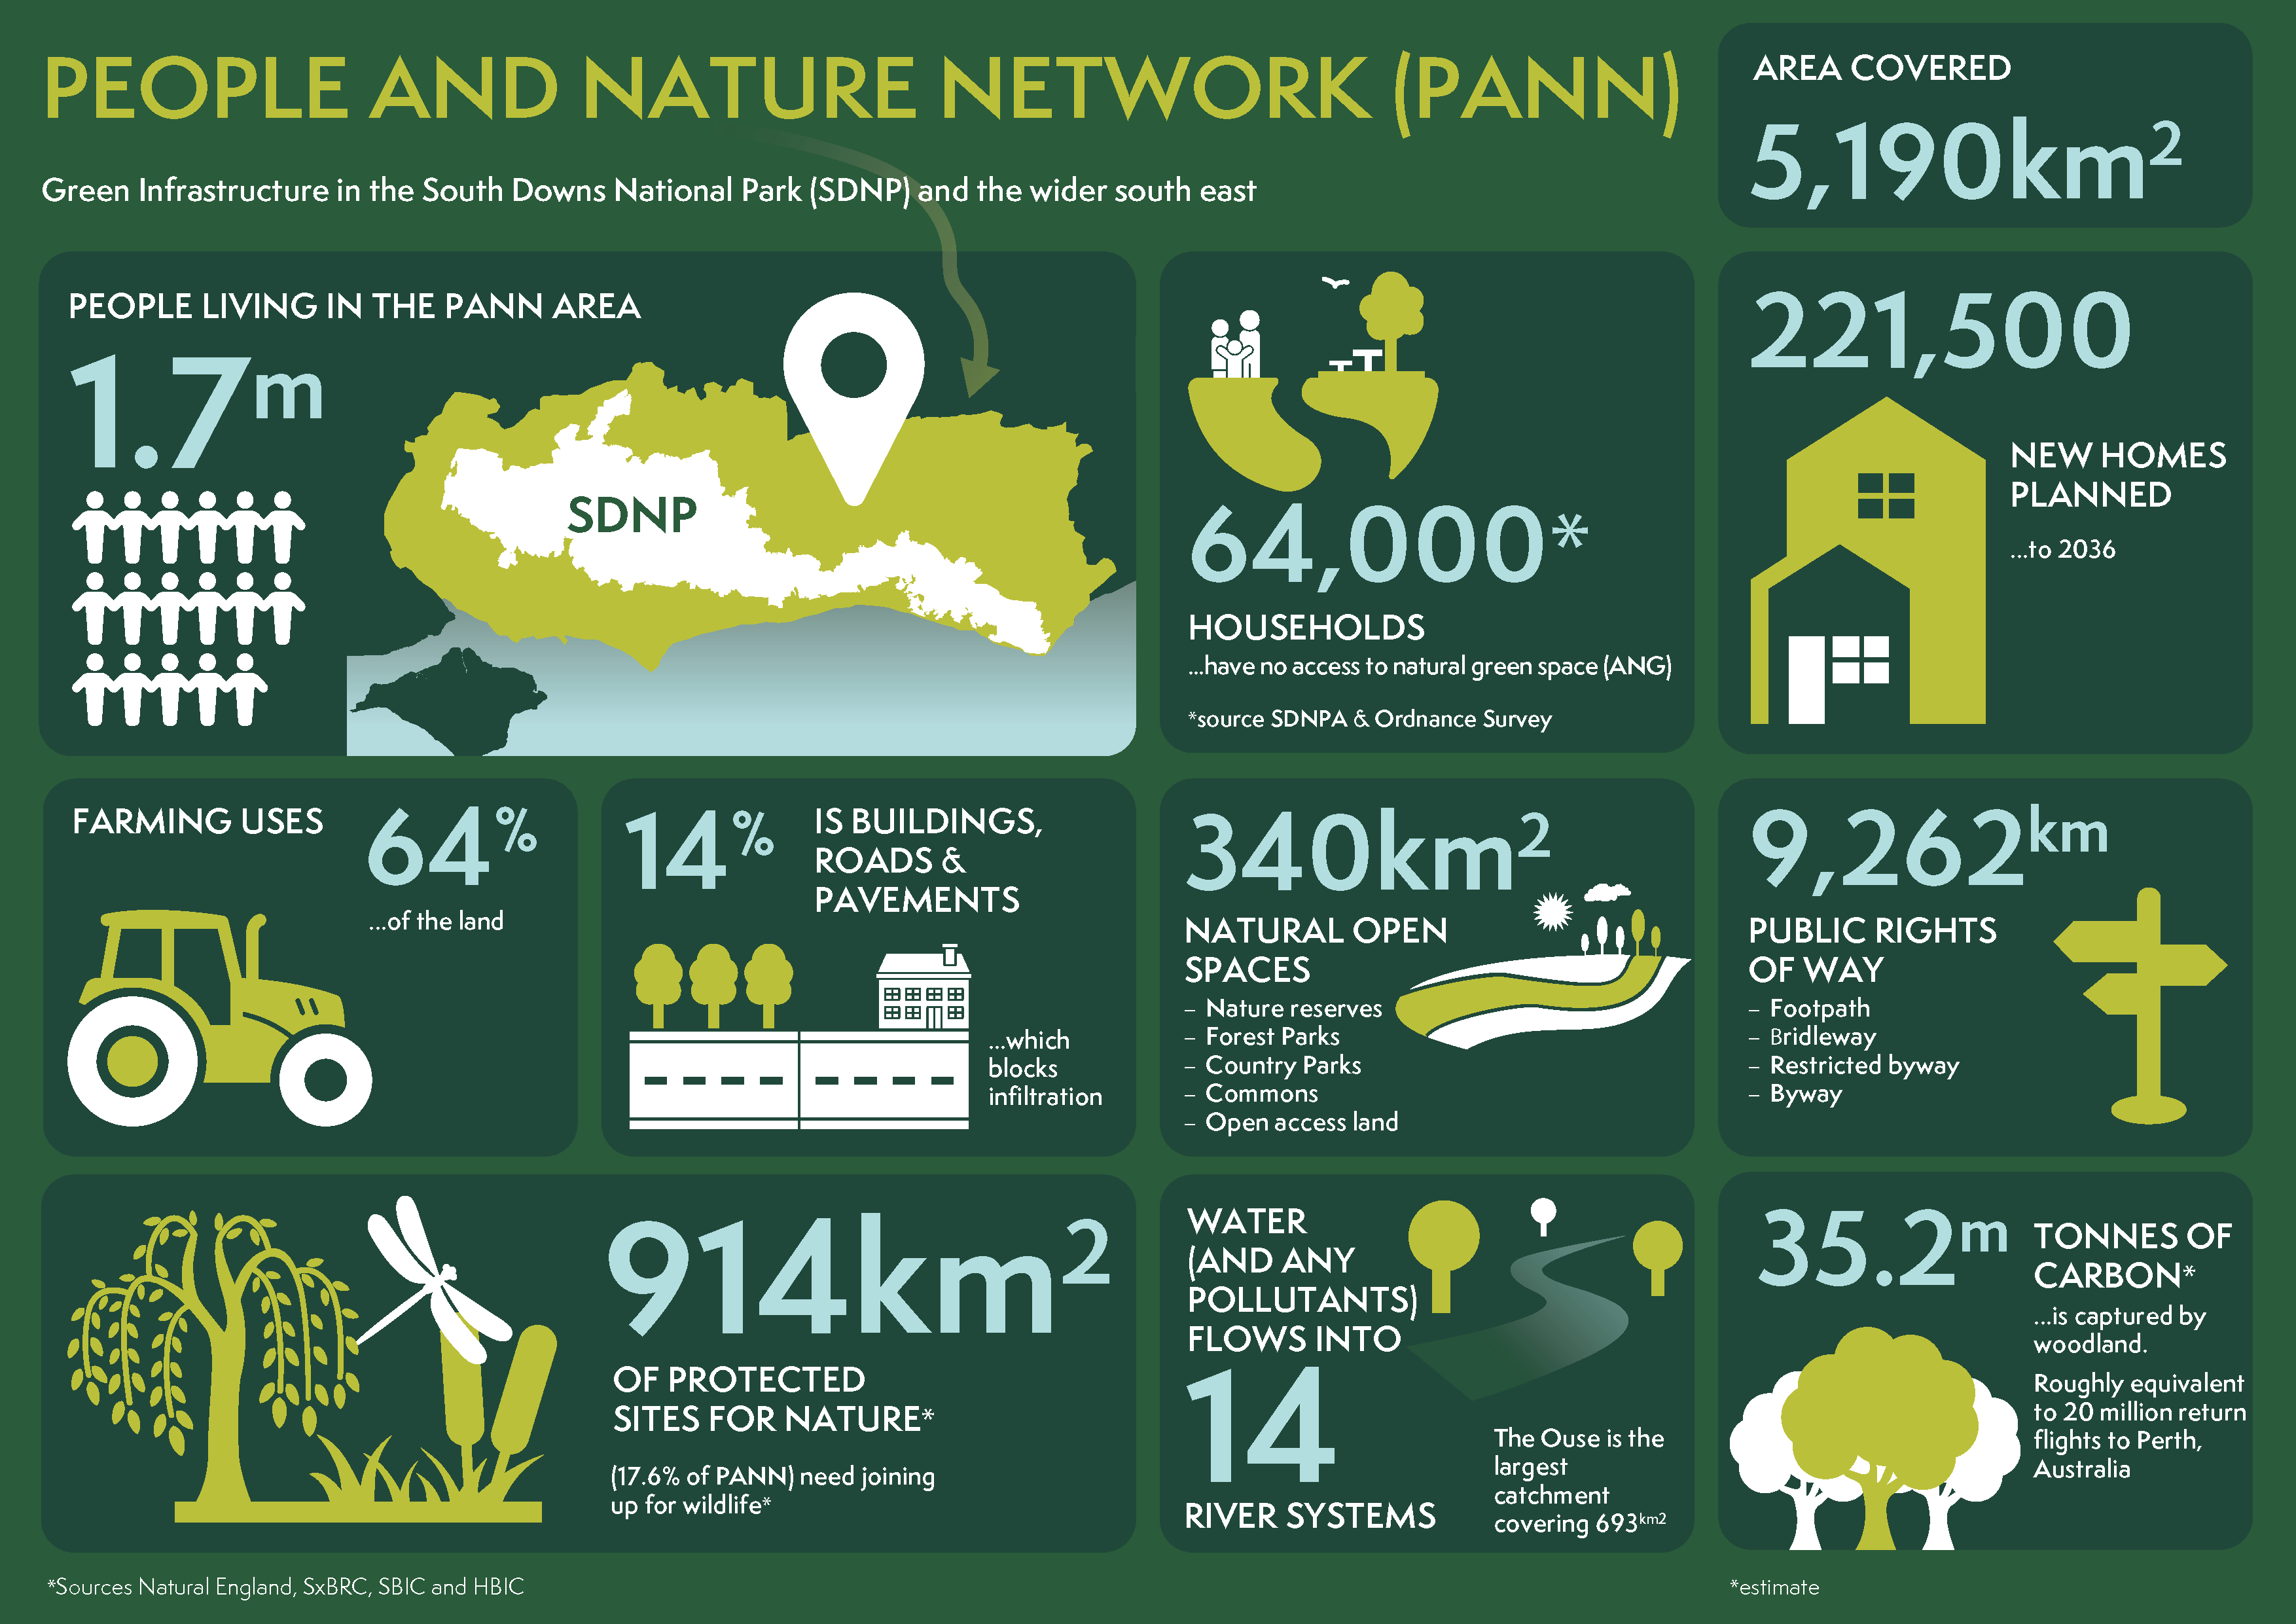 Infographic depicting statistics about the People and Nature Network in the South Downs and wider south east